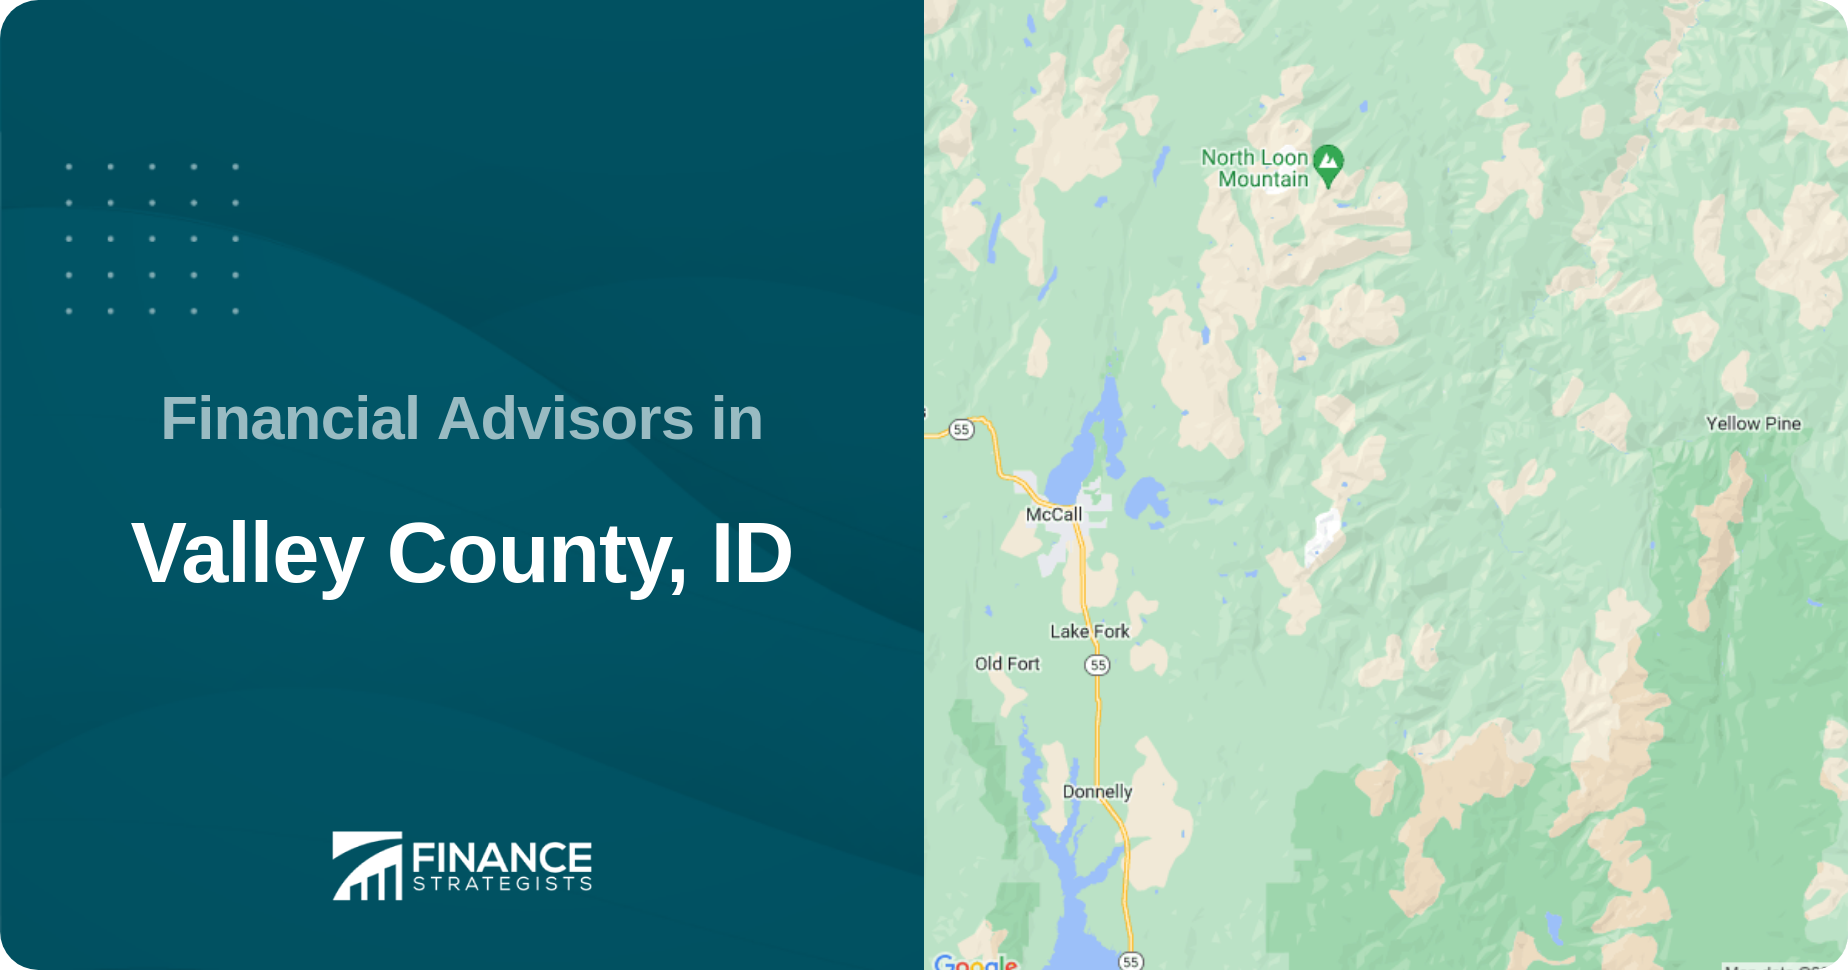 Financial Advisors in Valley County, ID